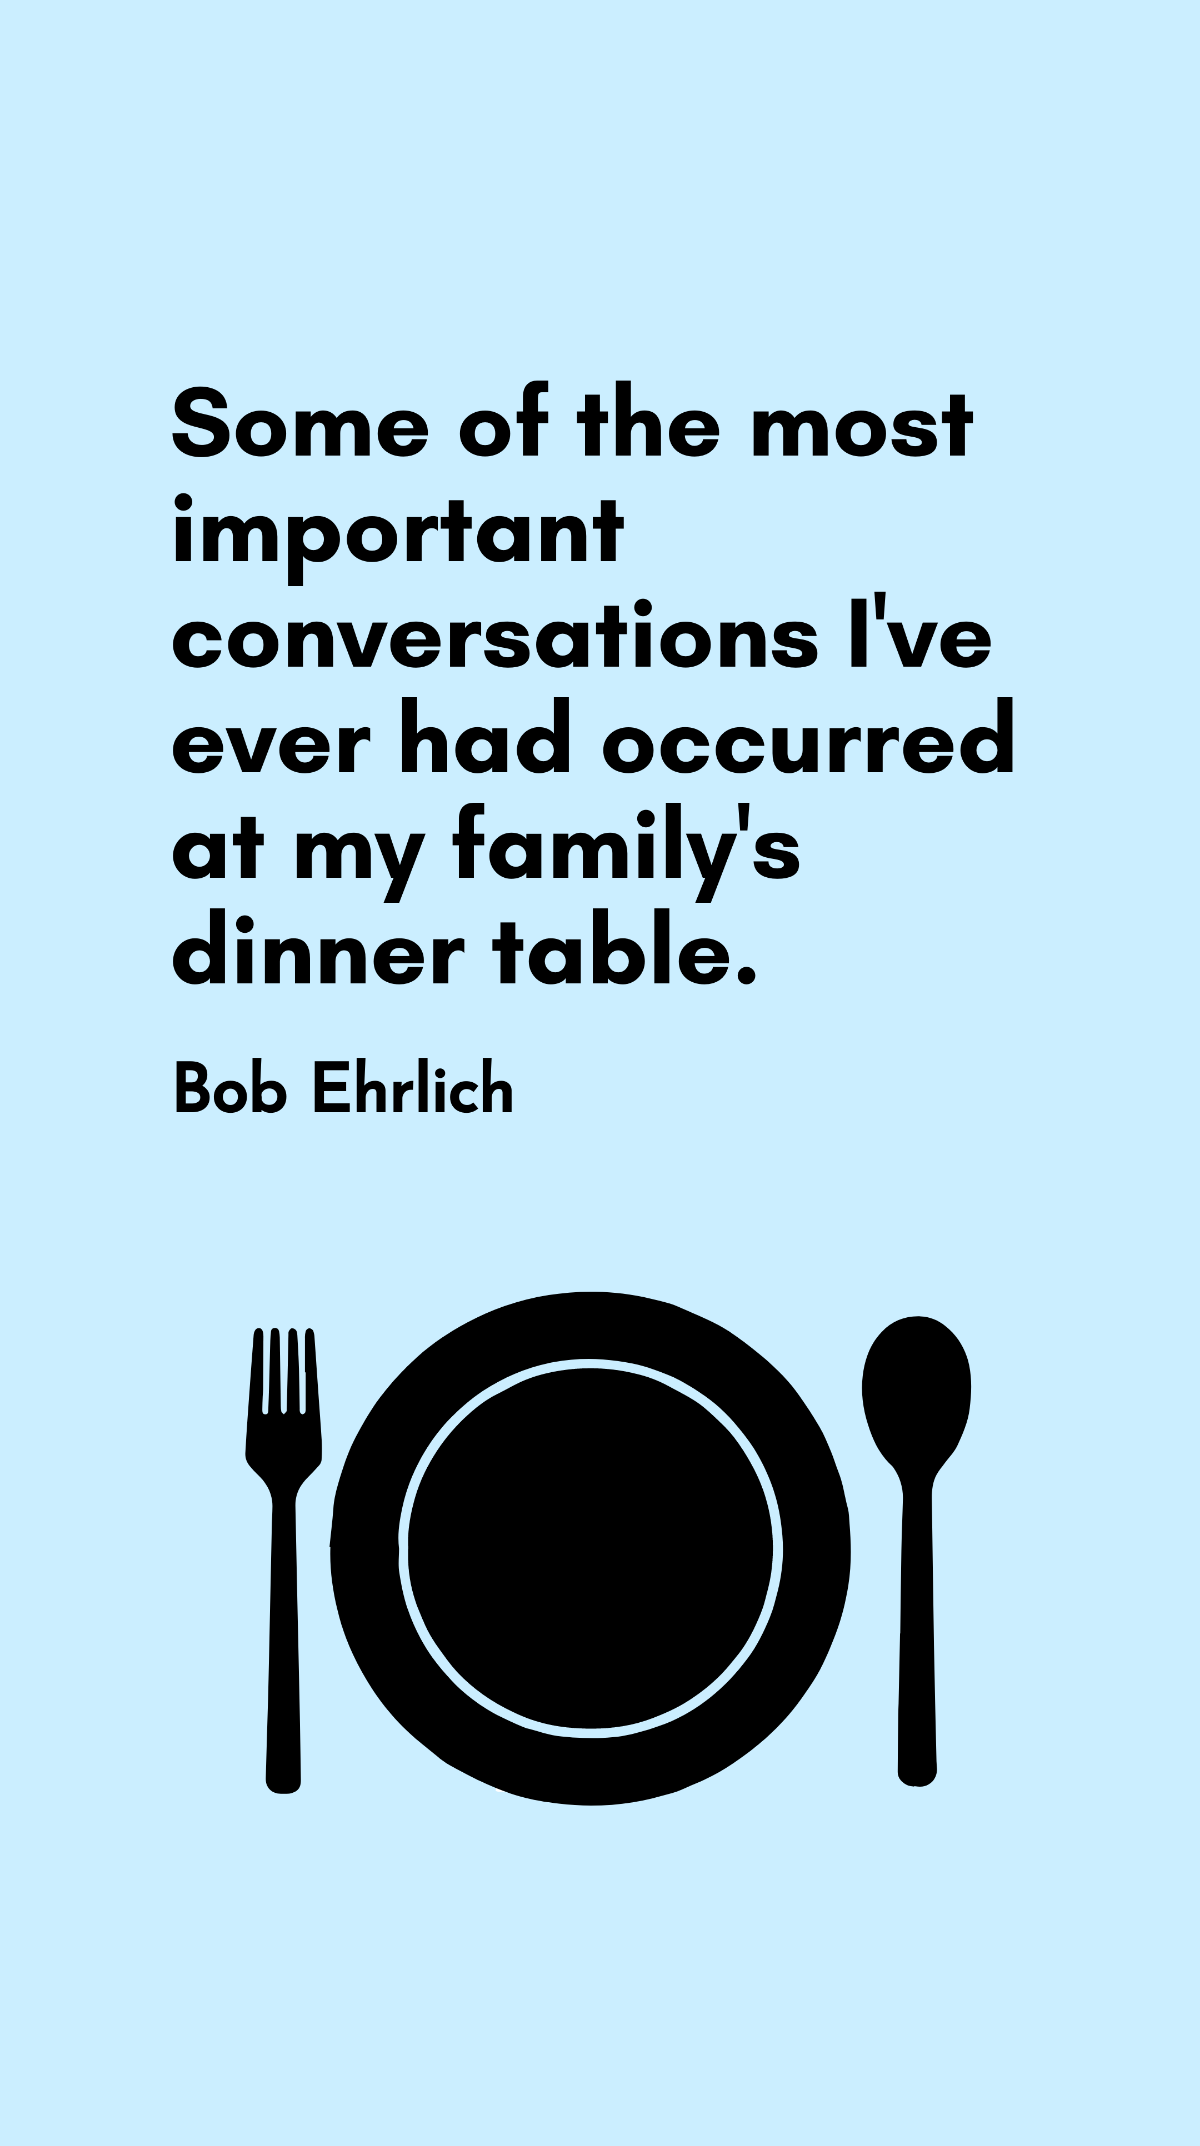 Bob Ehrlich - Some of the most important conversations I've ever had occurred at my family's dinner table.